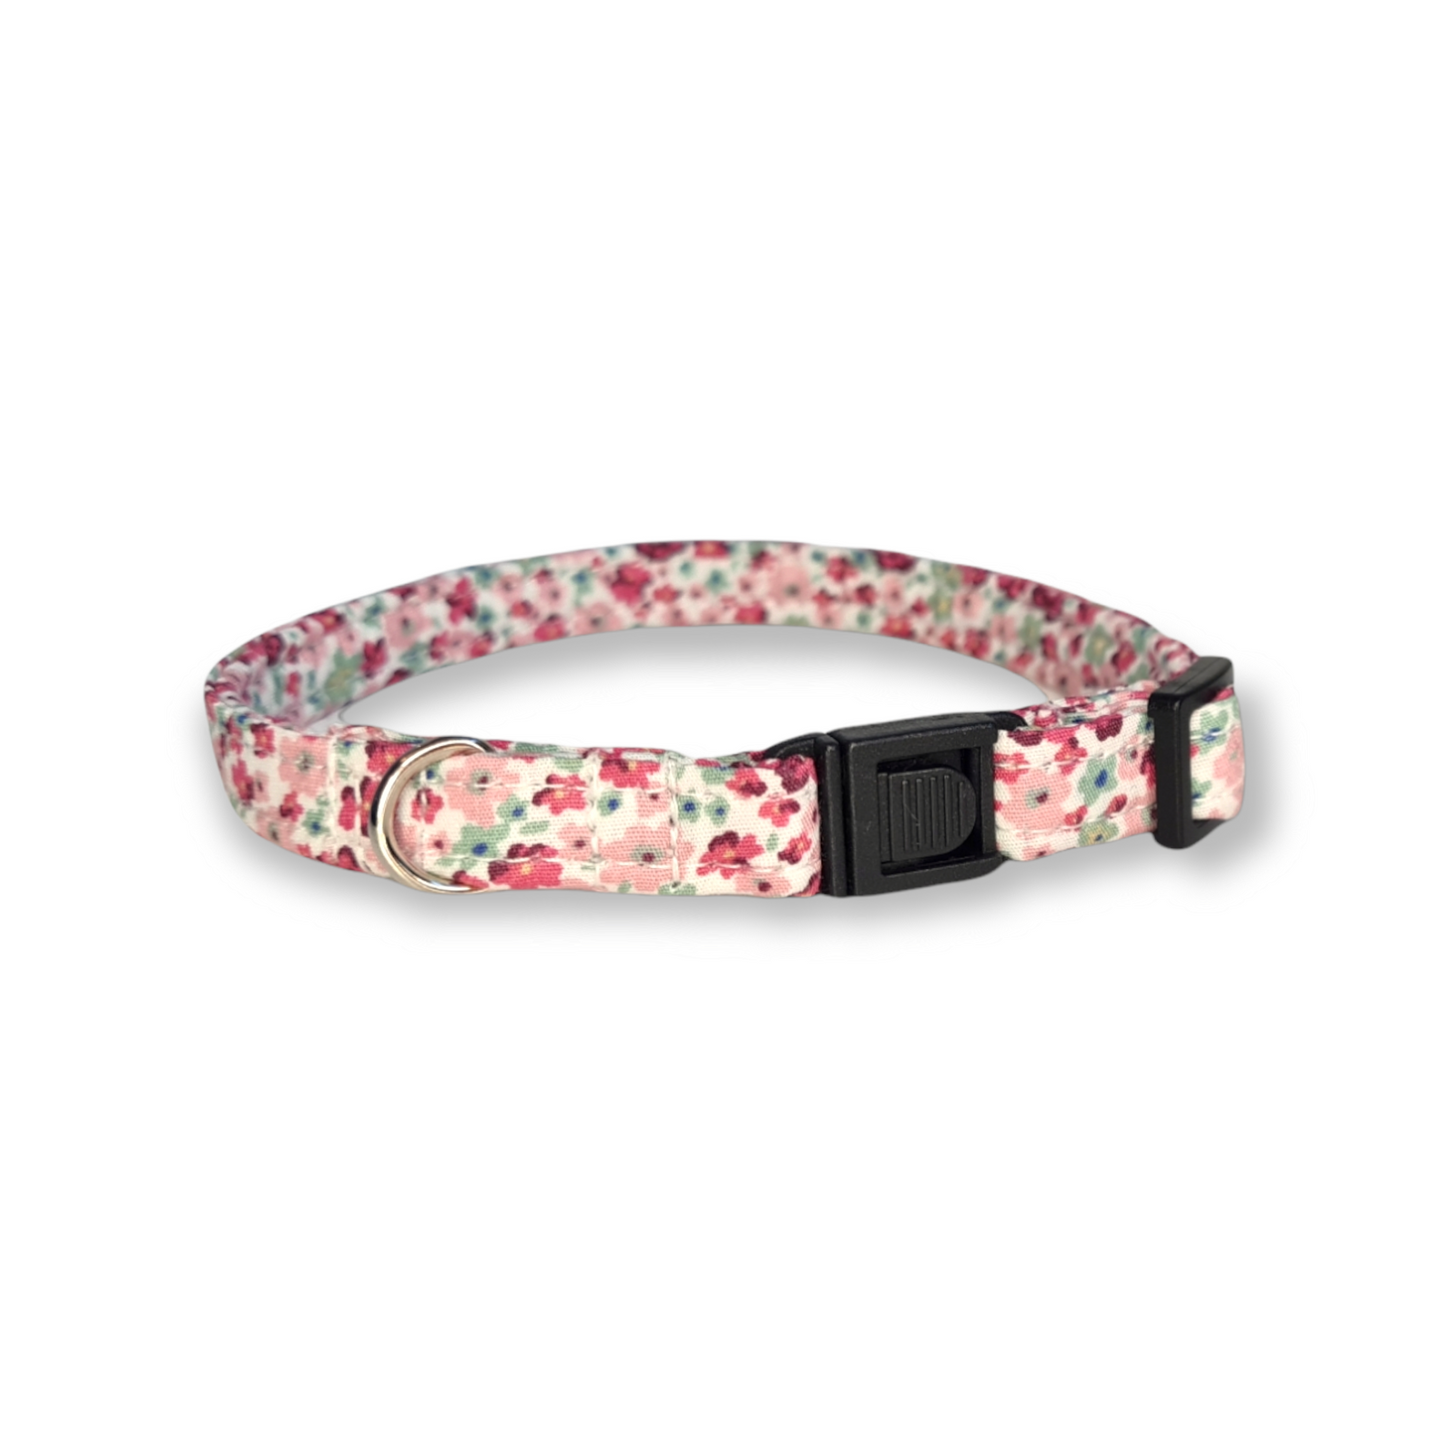 Cat collar pink floral ditsy print